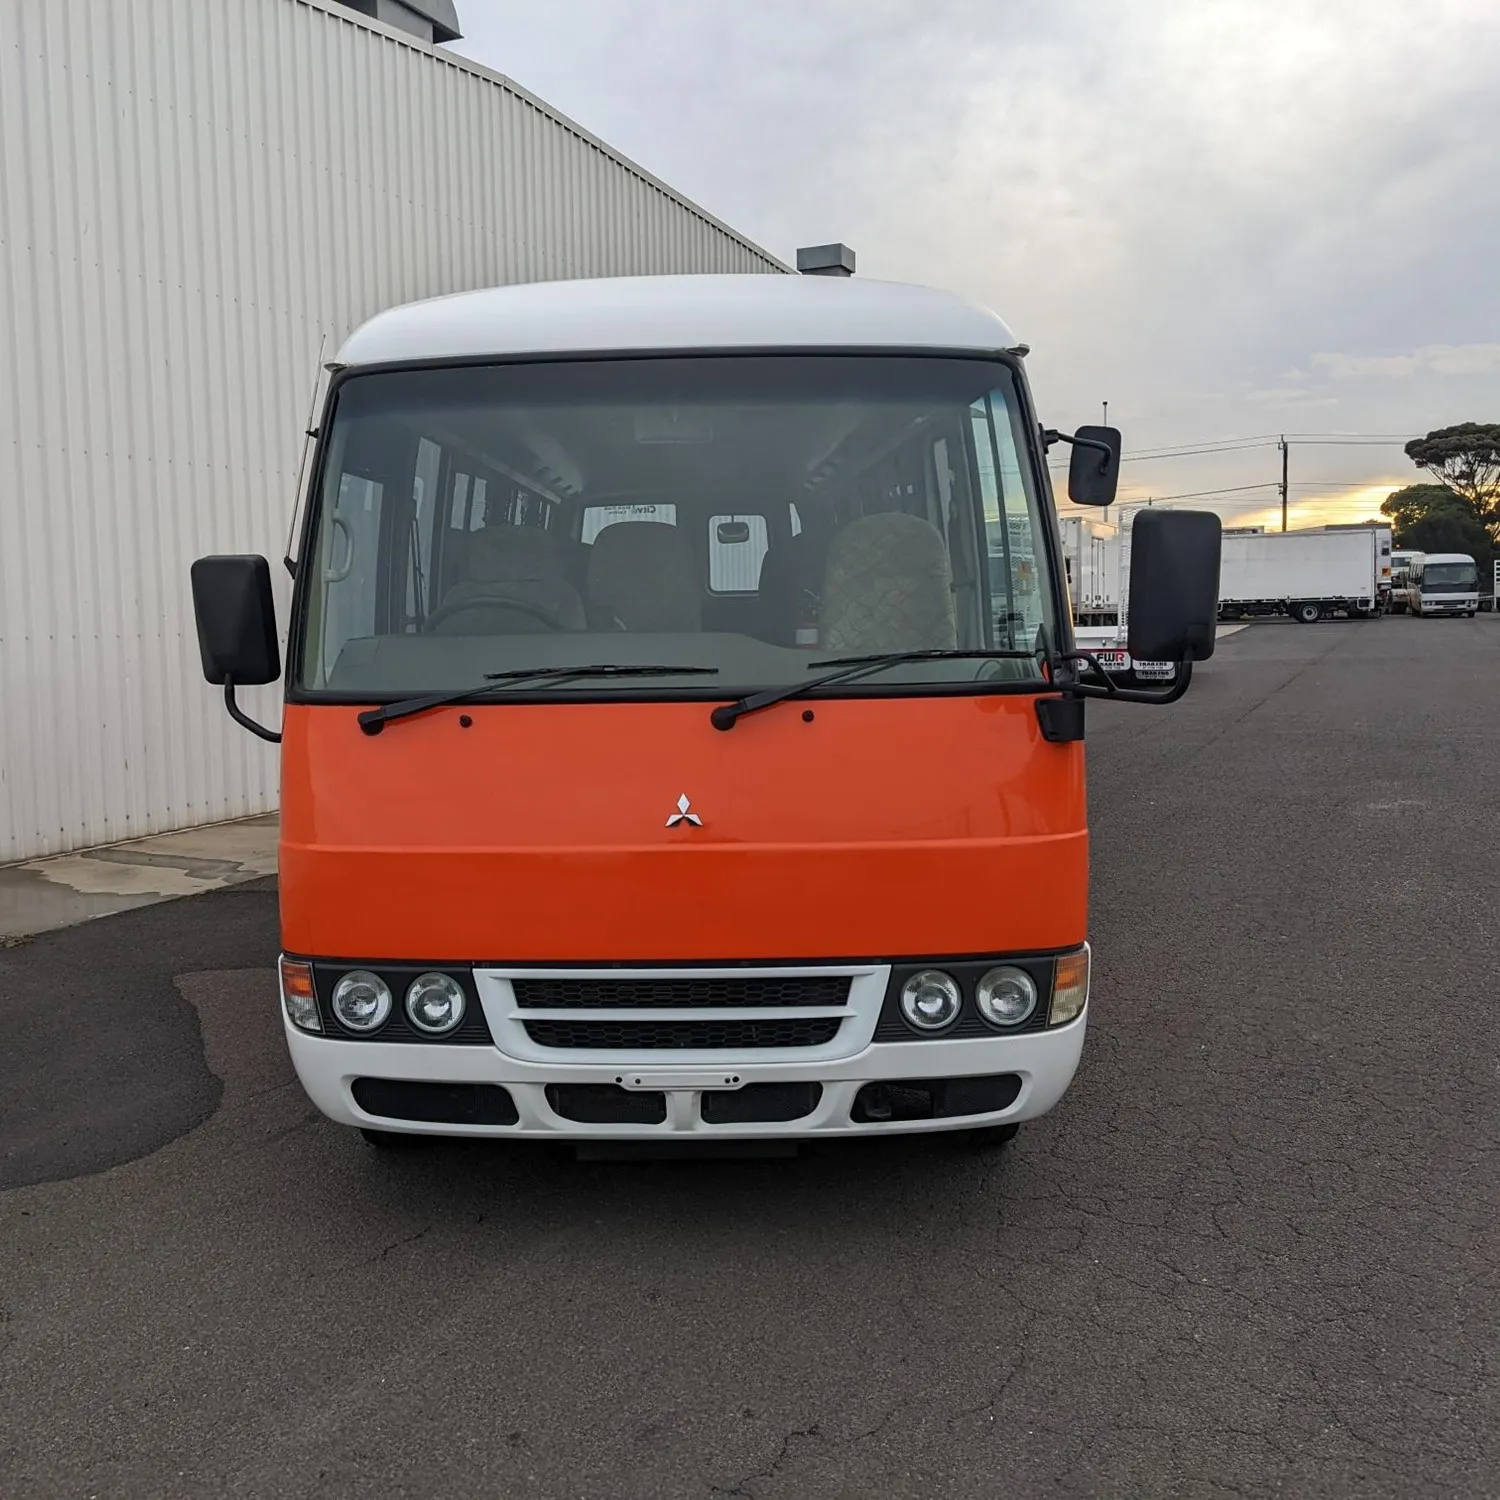 USED CHEAP 2008 FUSO ROSA 30 SEATER BUS